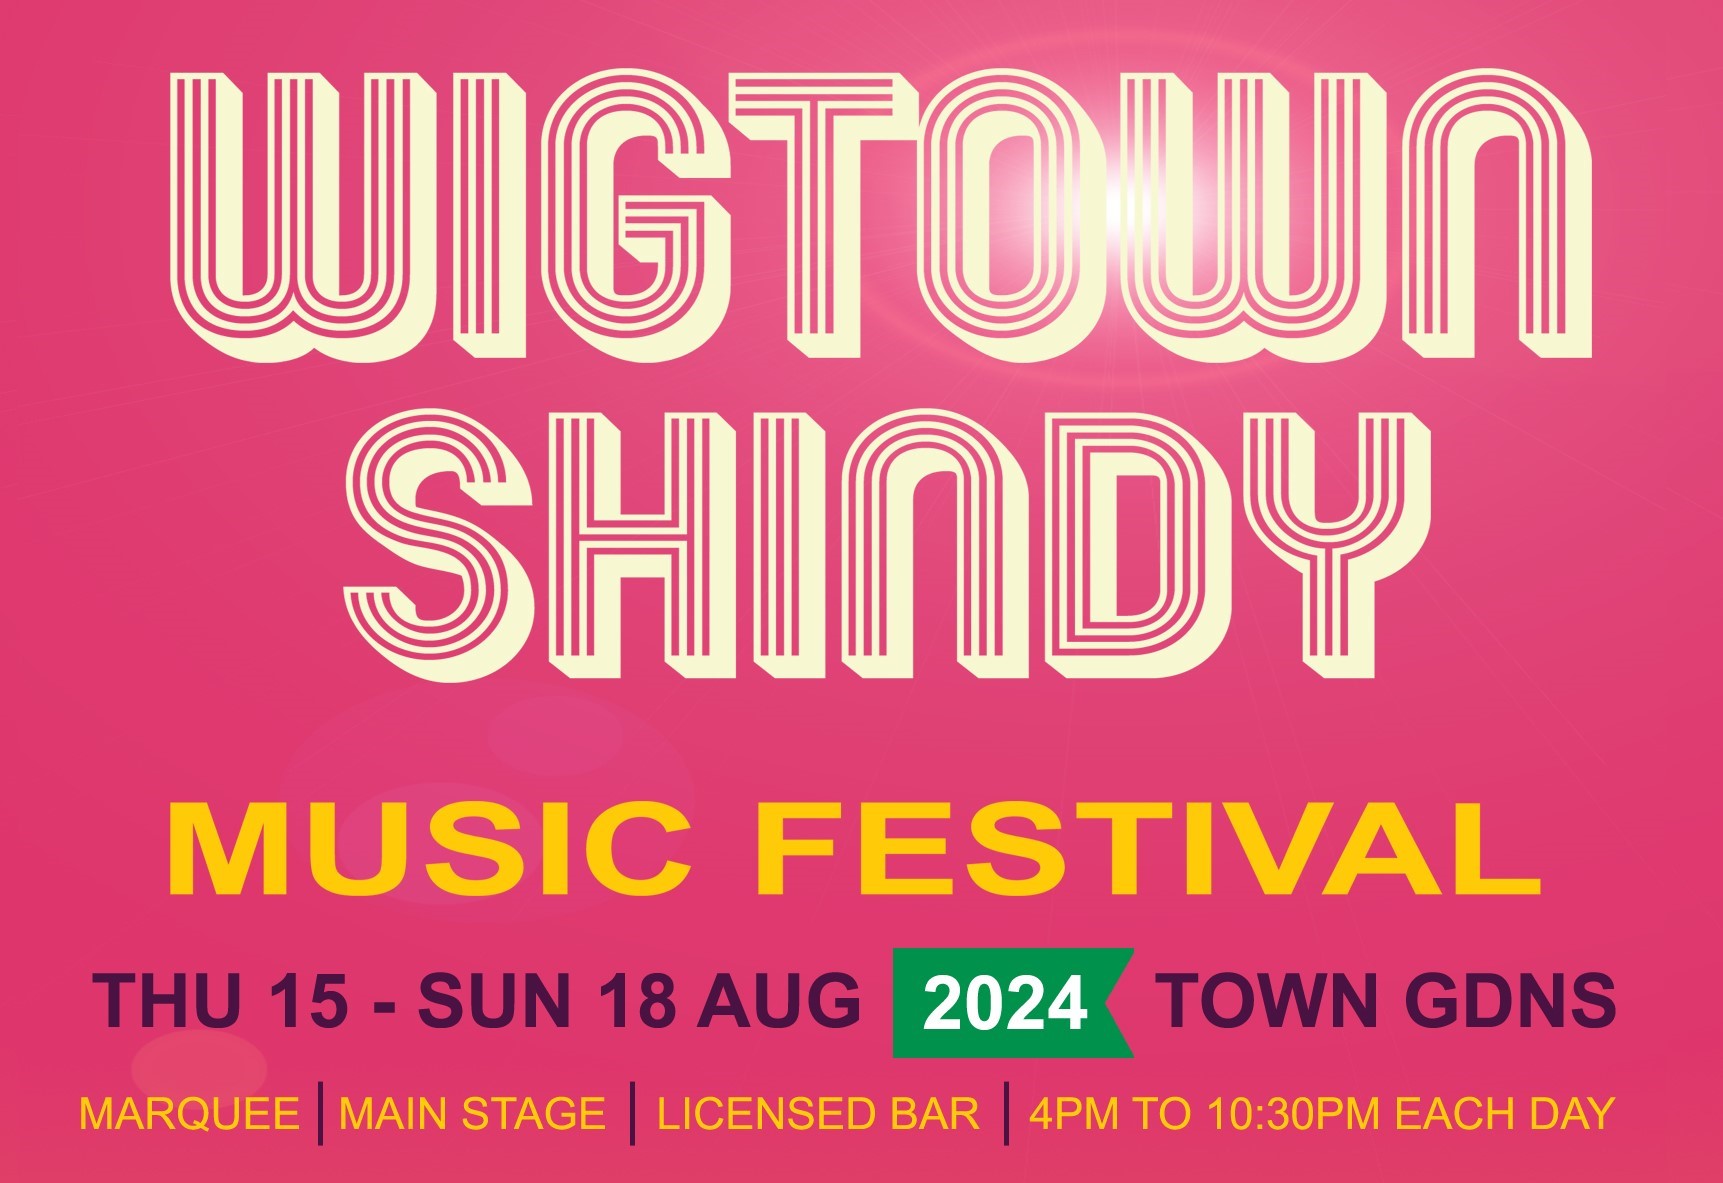 Wigtown Shindy music festival 18th to 20th august 2023